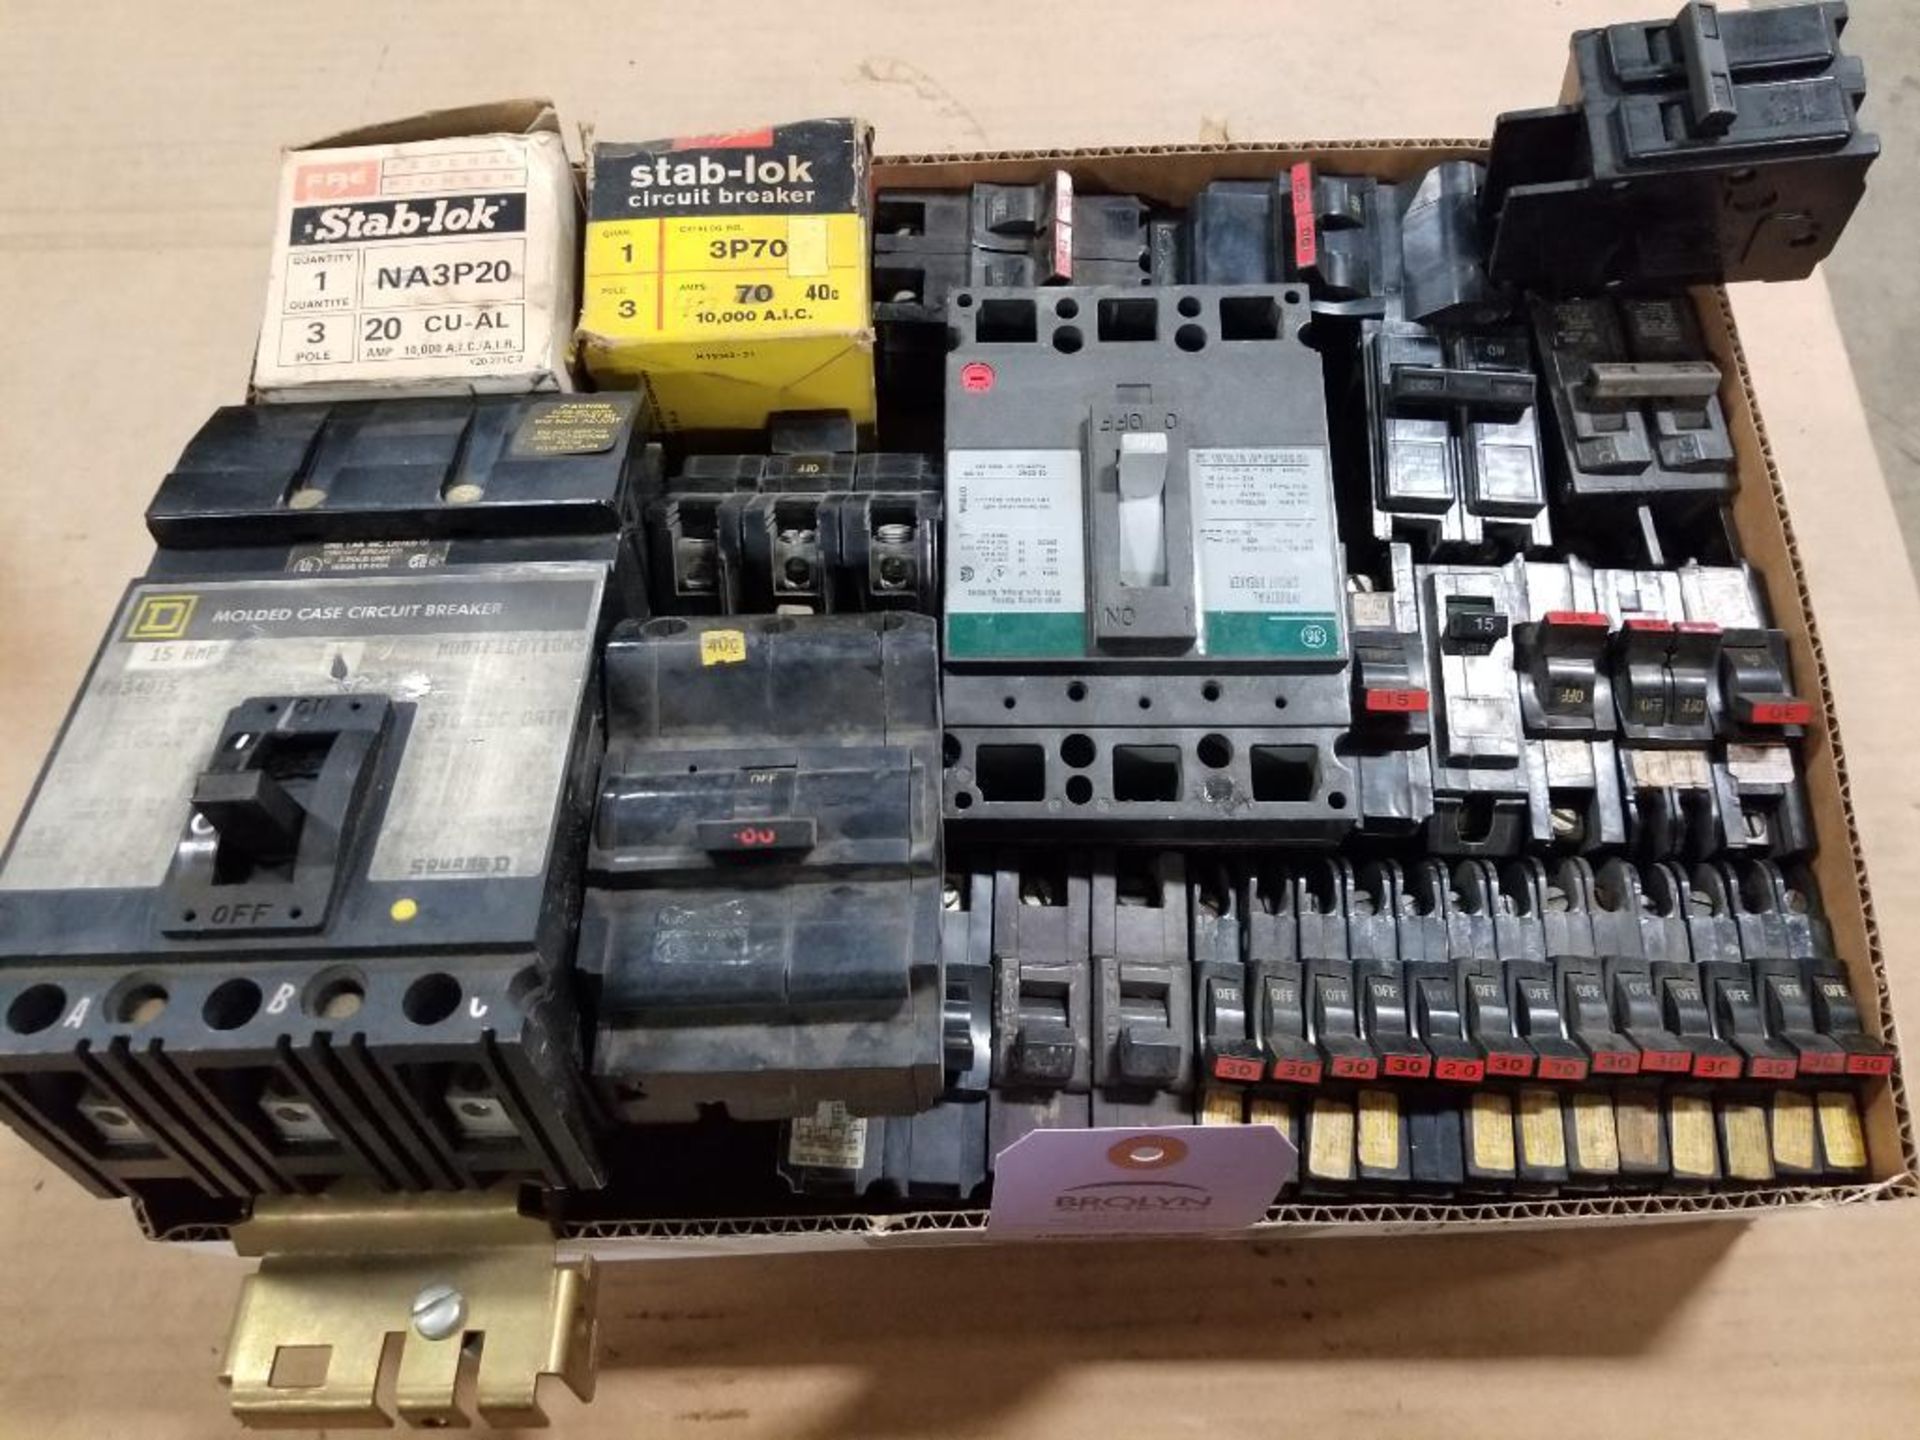 Assorted electrical breakers. Square-D, GE, Stab-lok.